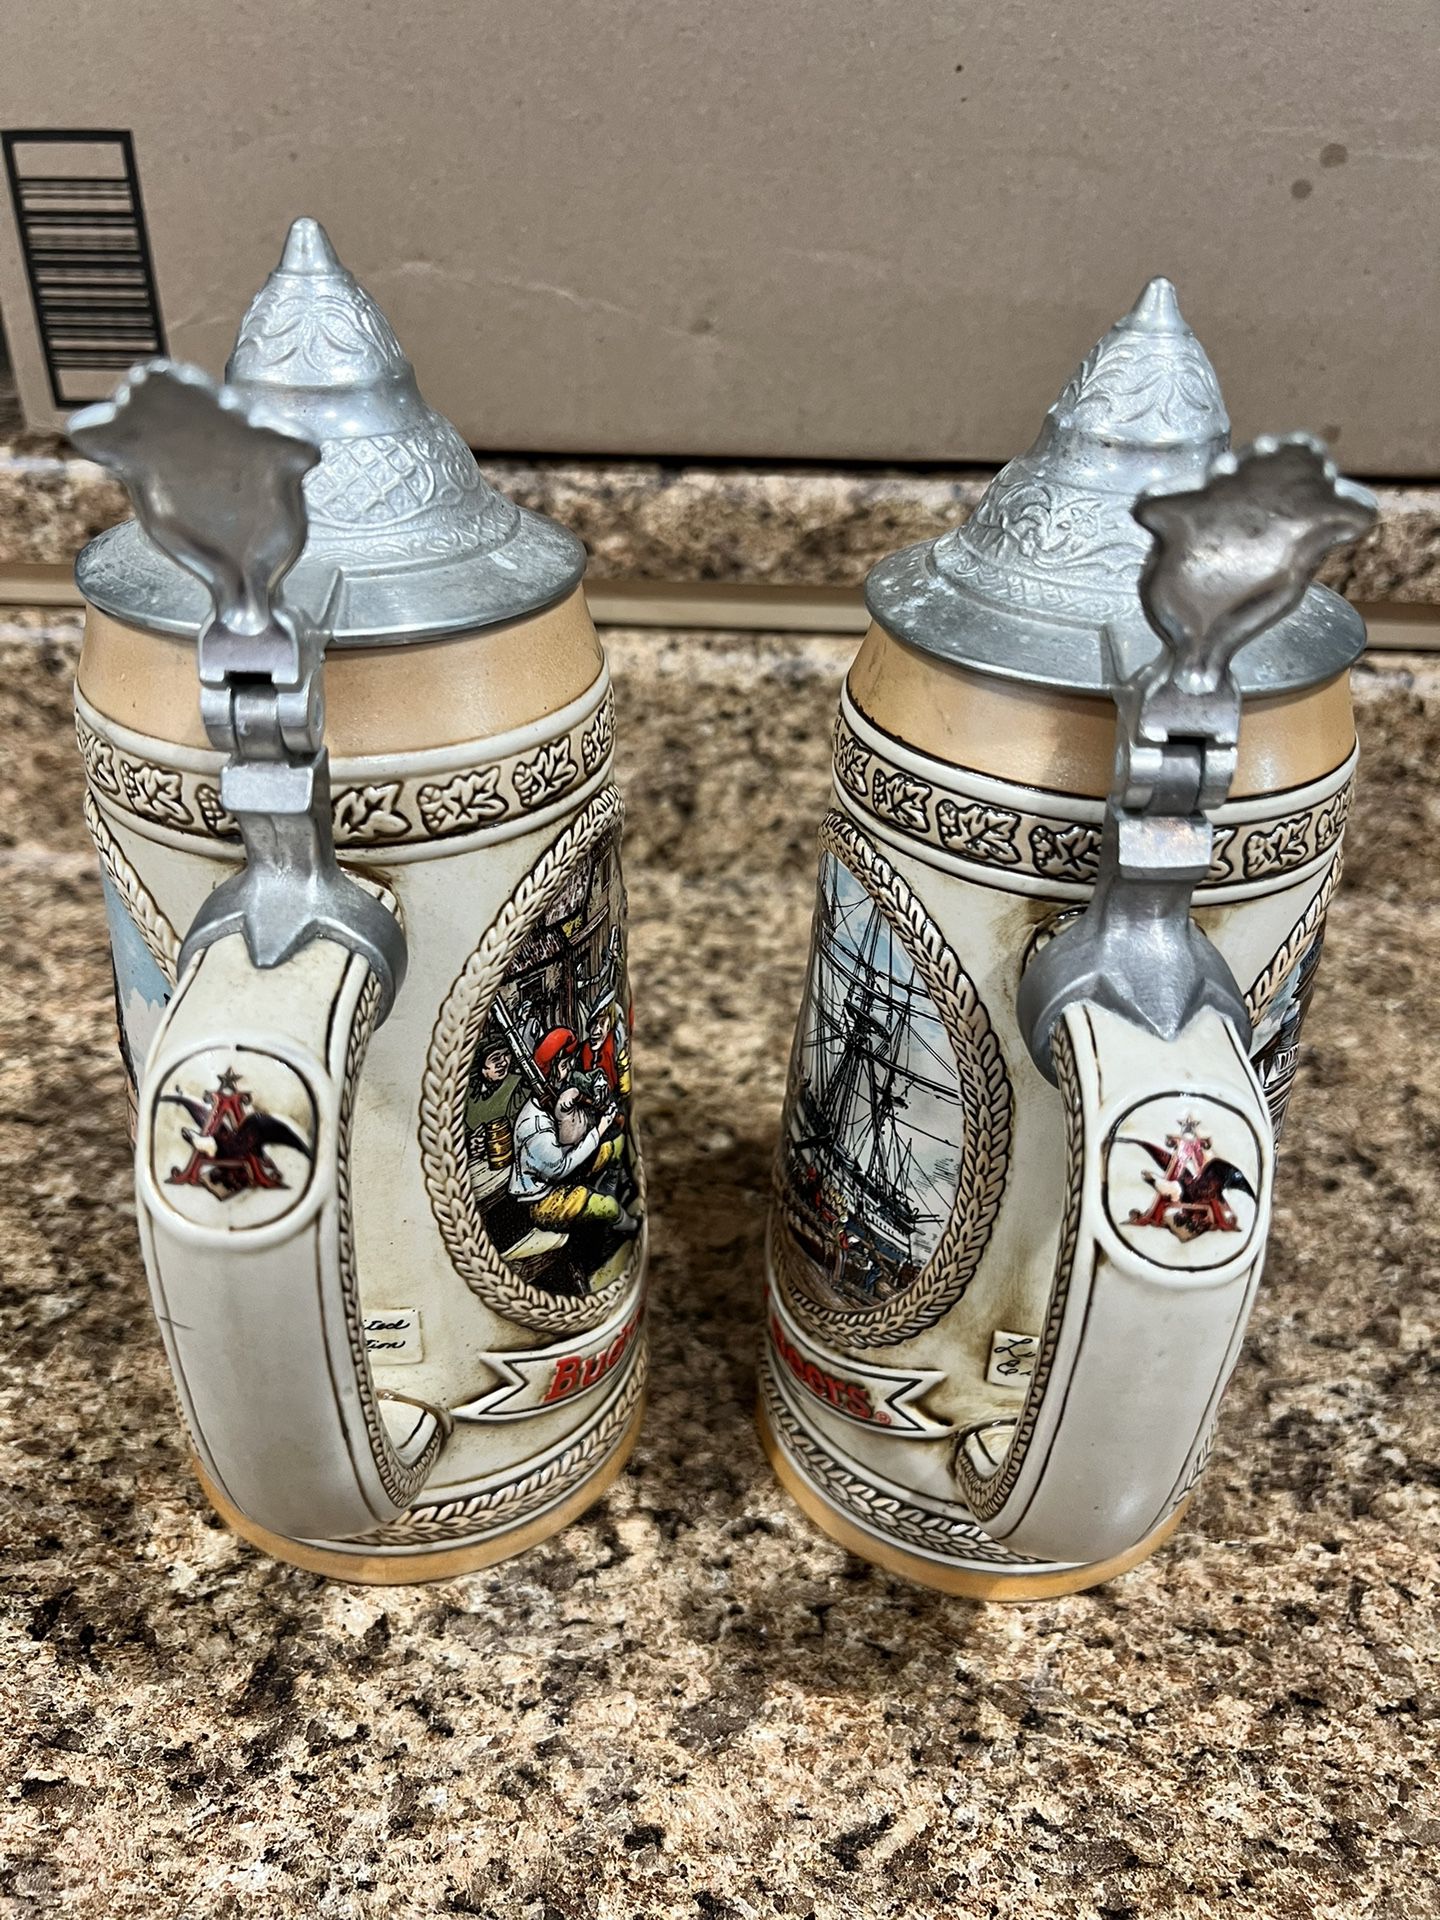 Collectible Collectible Beer Steins